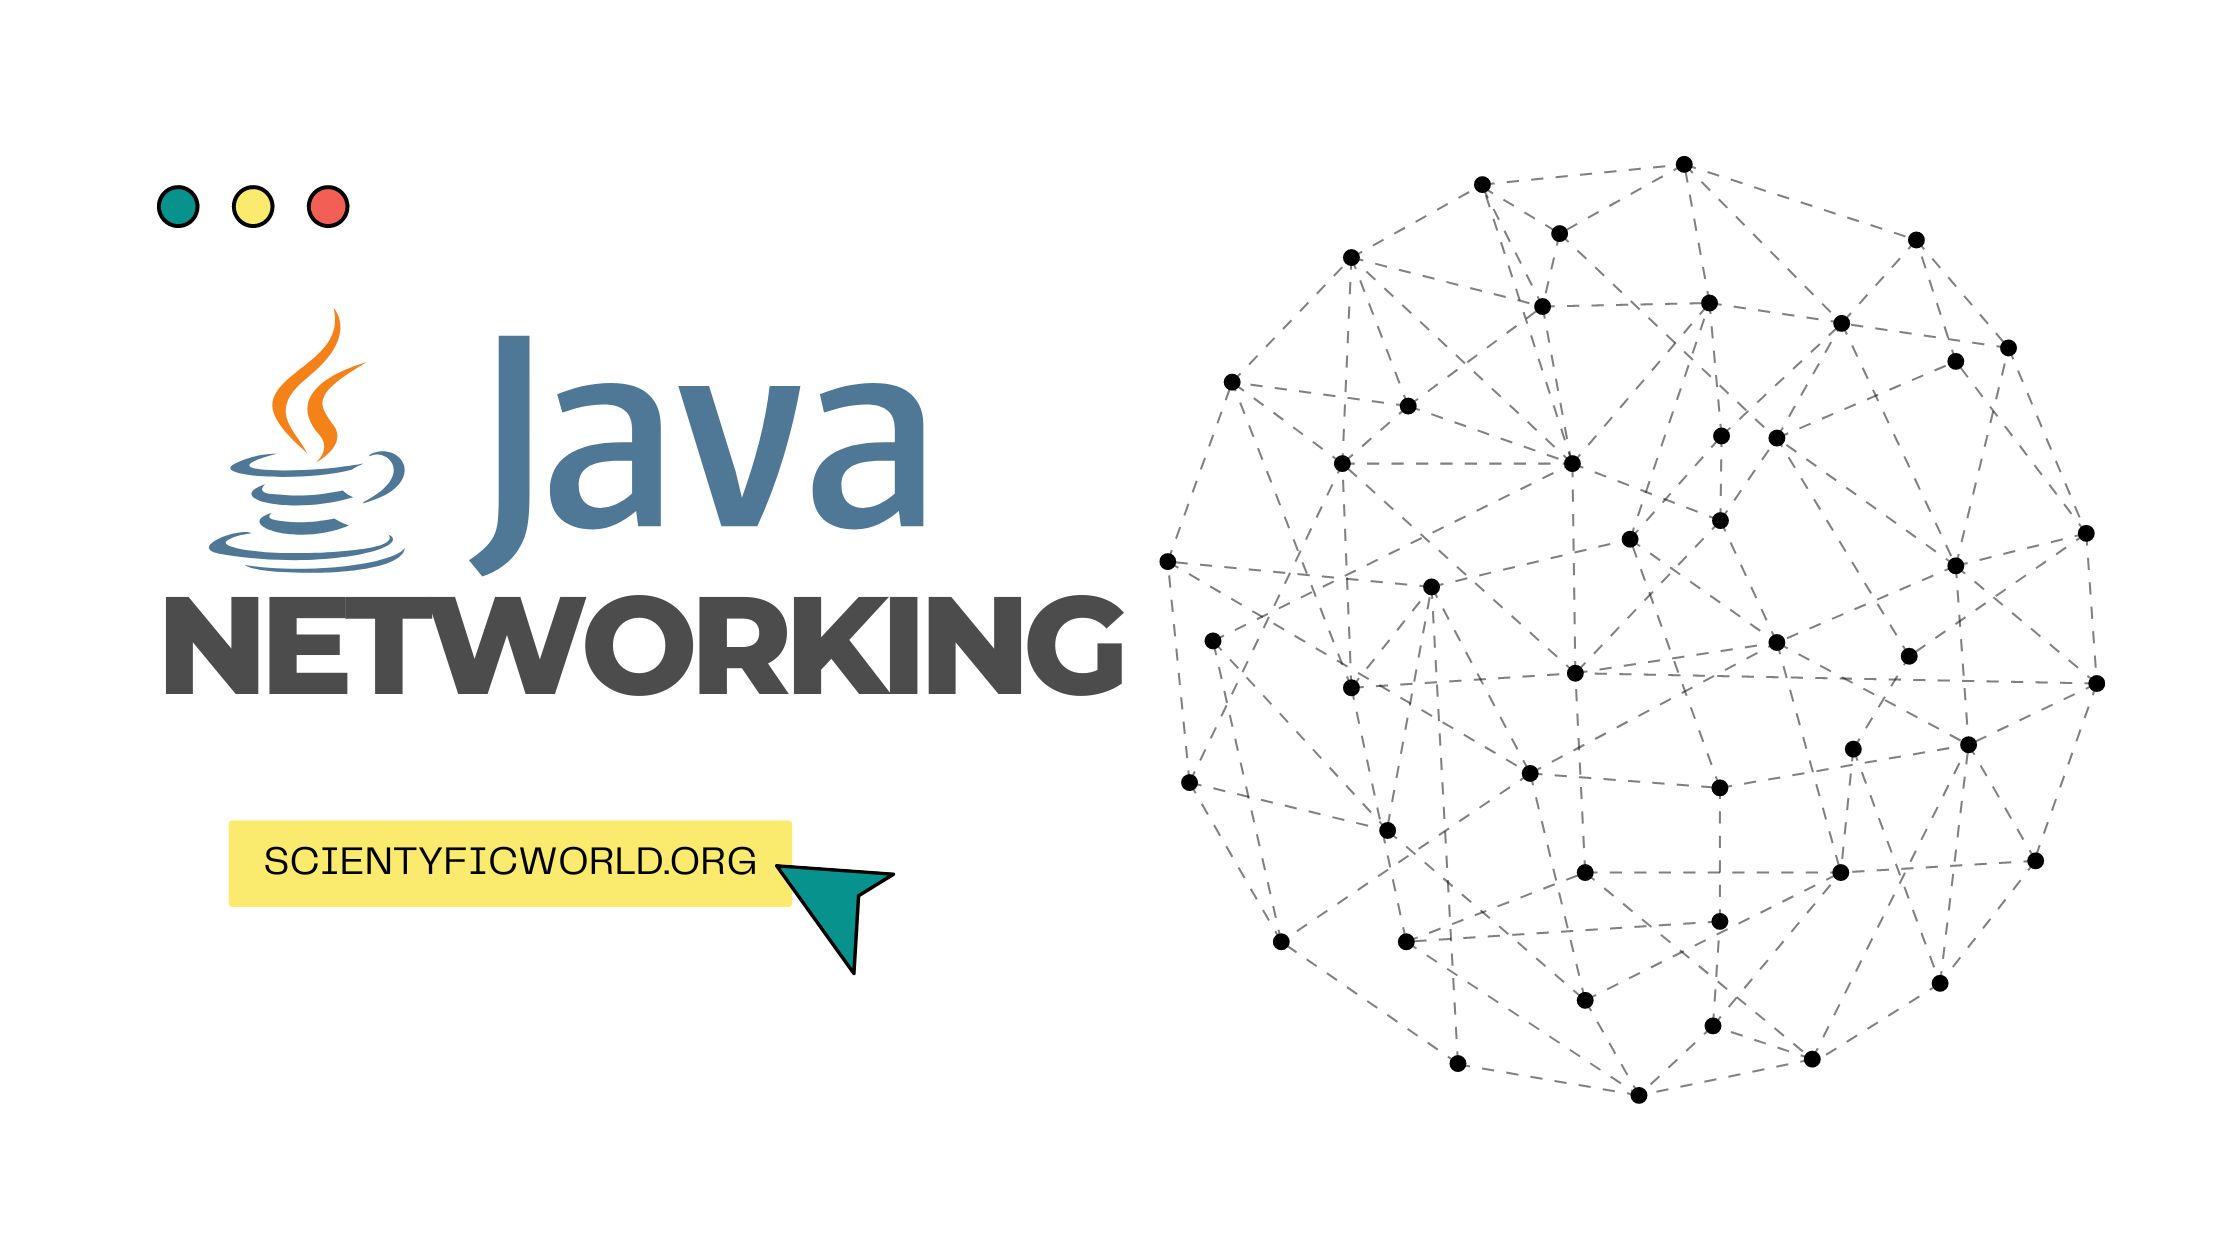 Java Networking blog banner with java logo